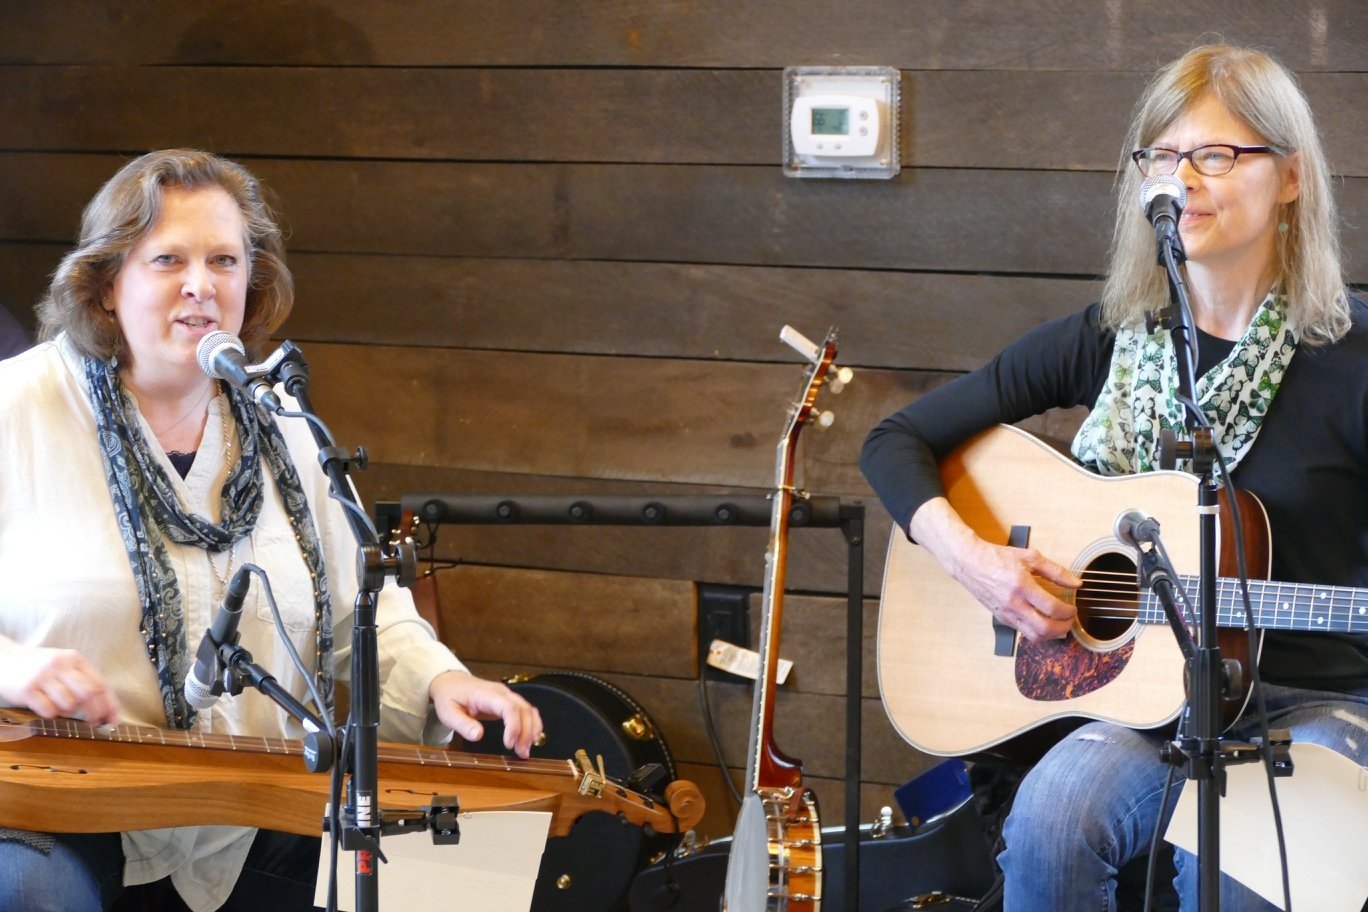 Lee Cagle and Mary Baddour, Butterfly Gap, at Ag Day, Germantown Farm Park 2018